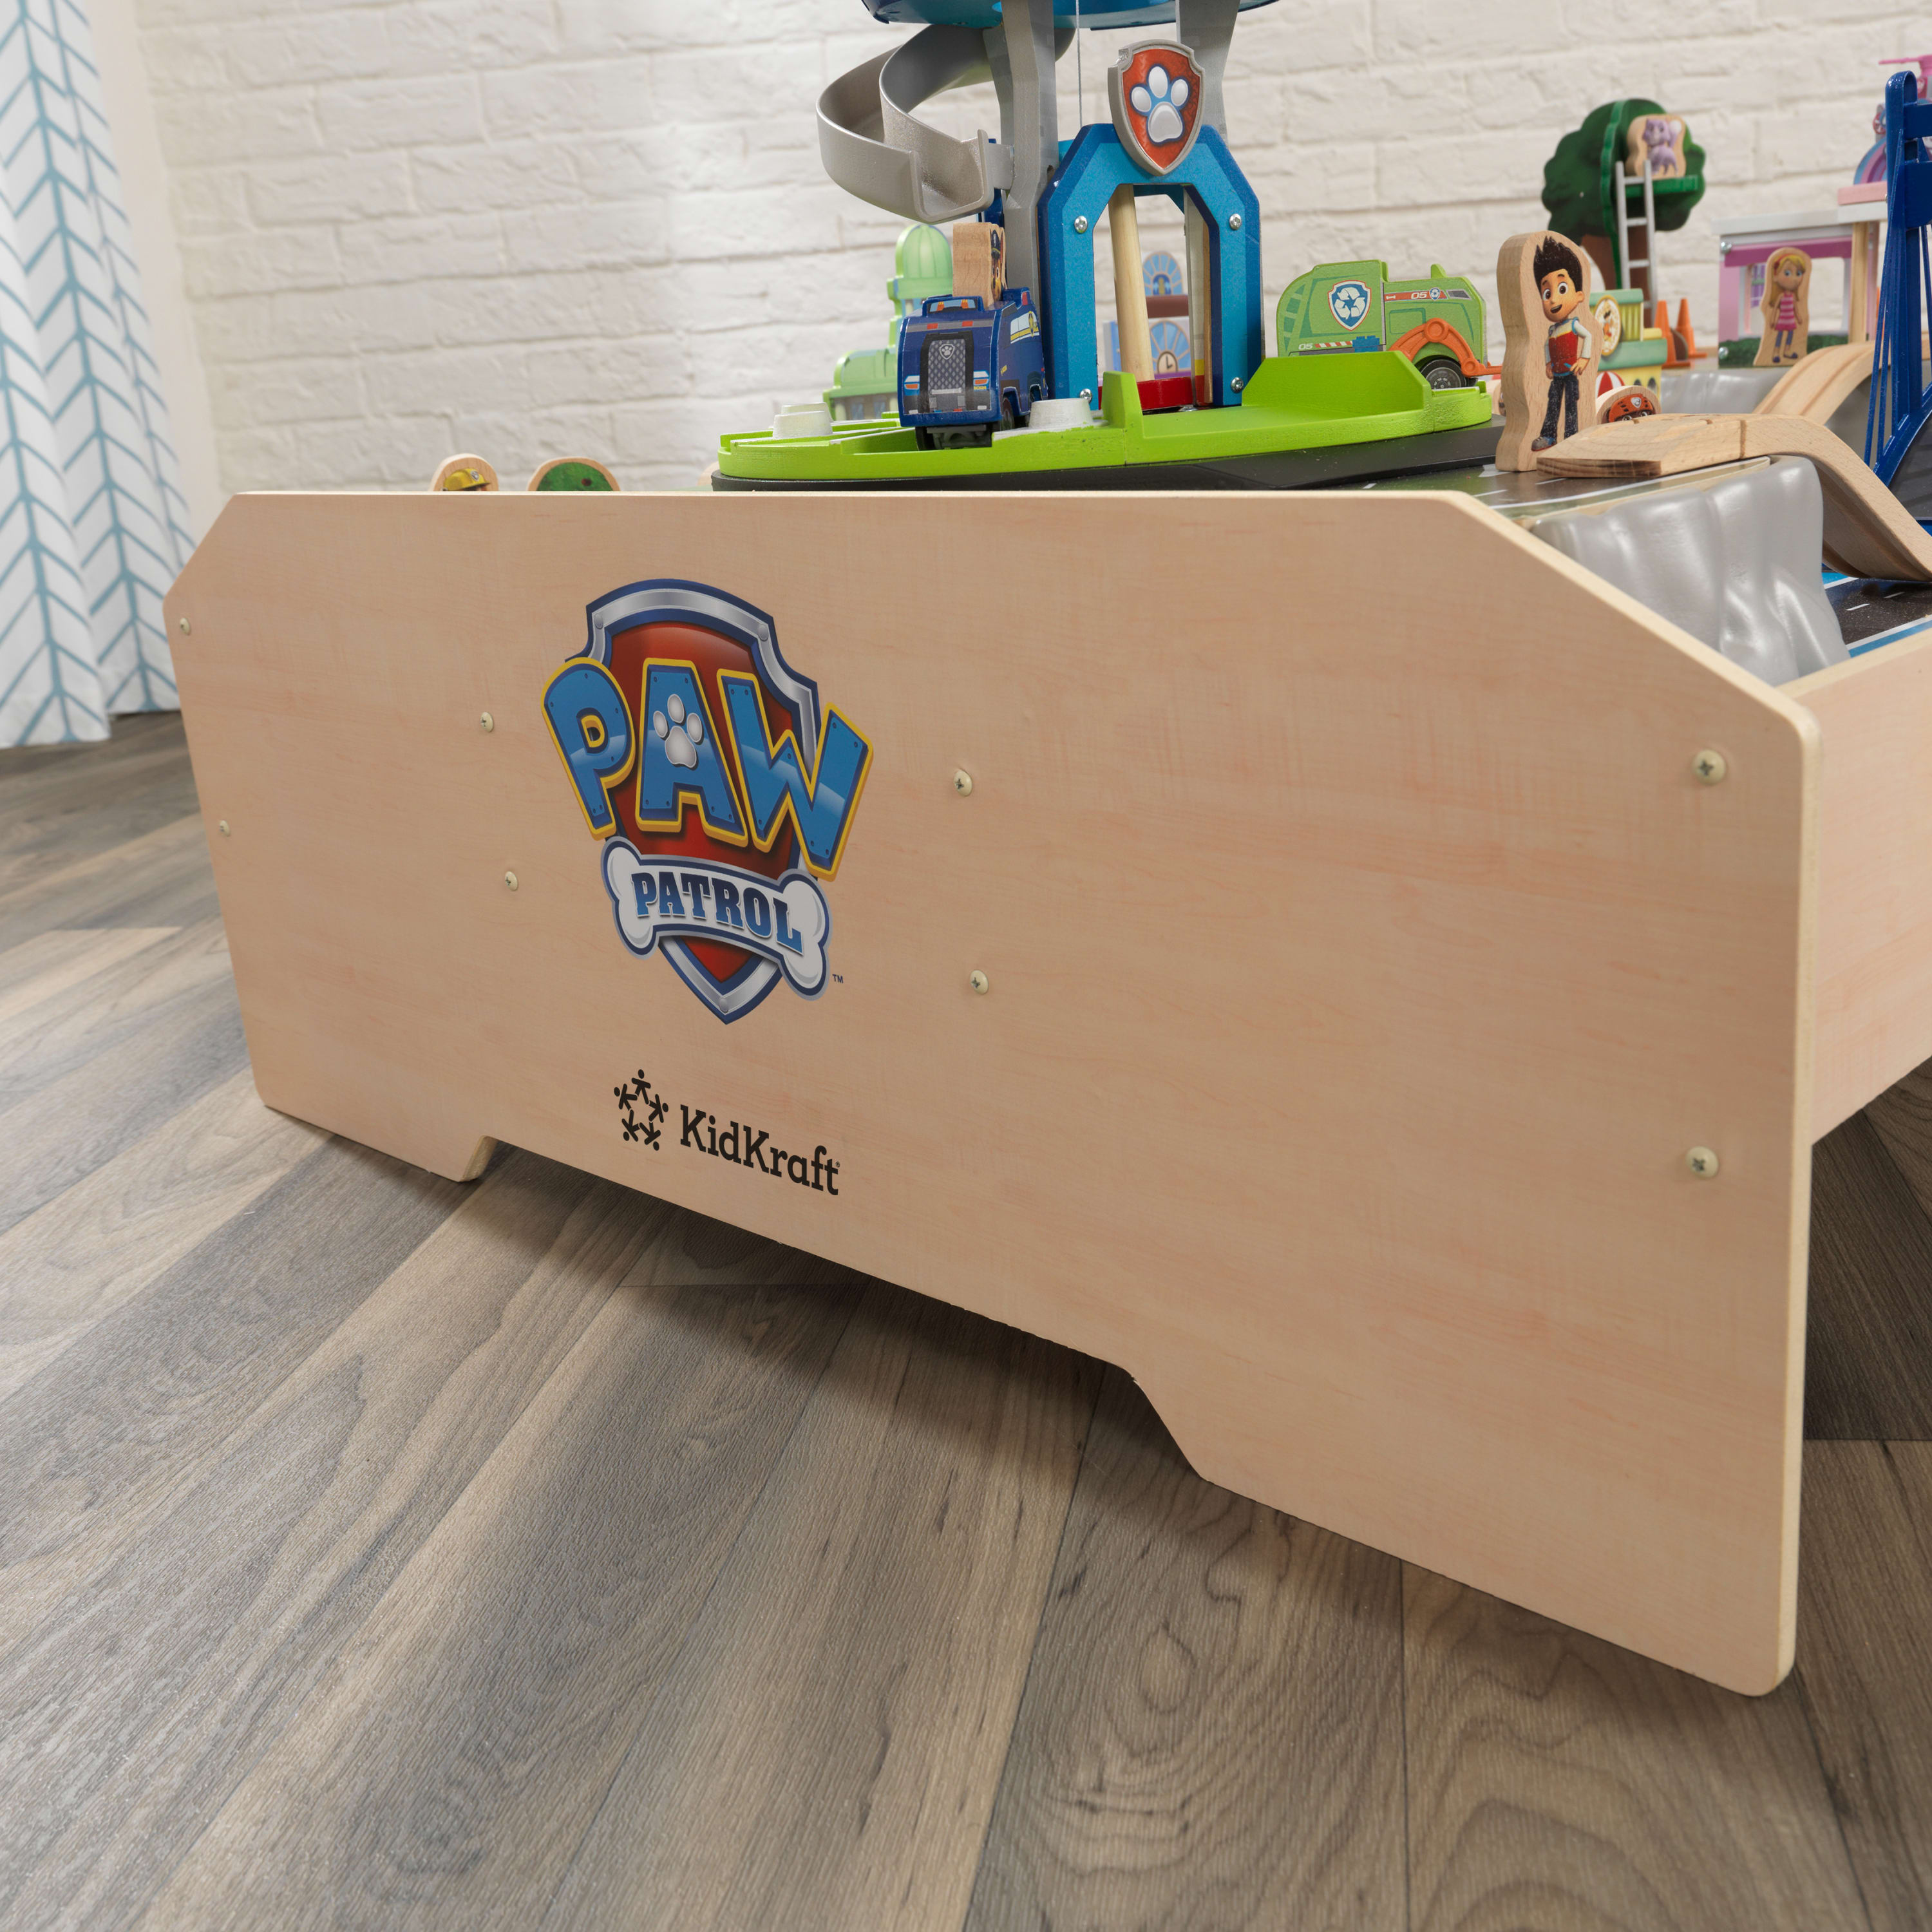 KidKraft PAW Patrol Adventure Bay Wooden Play Table with 73 Accessories - image 5 of 10